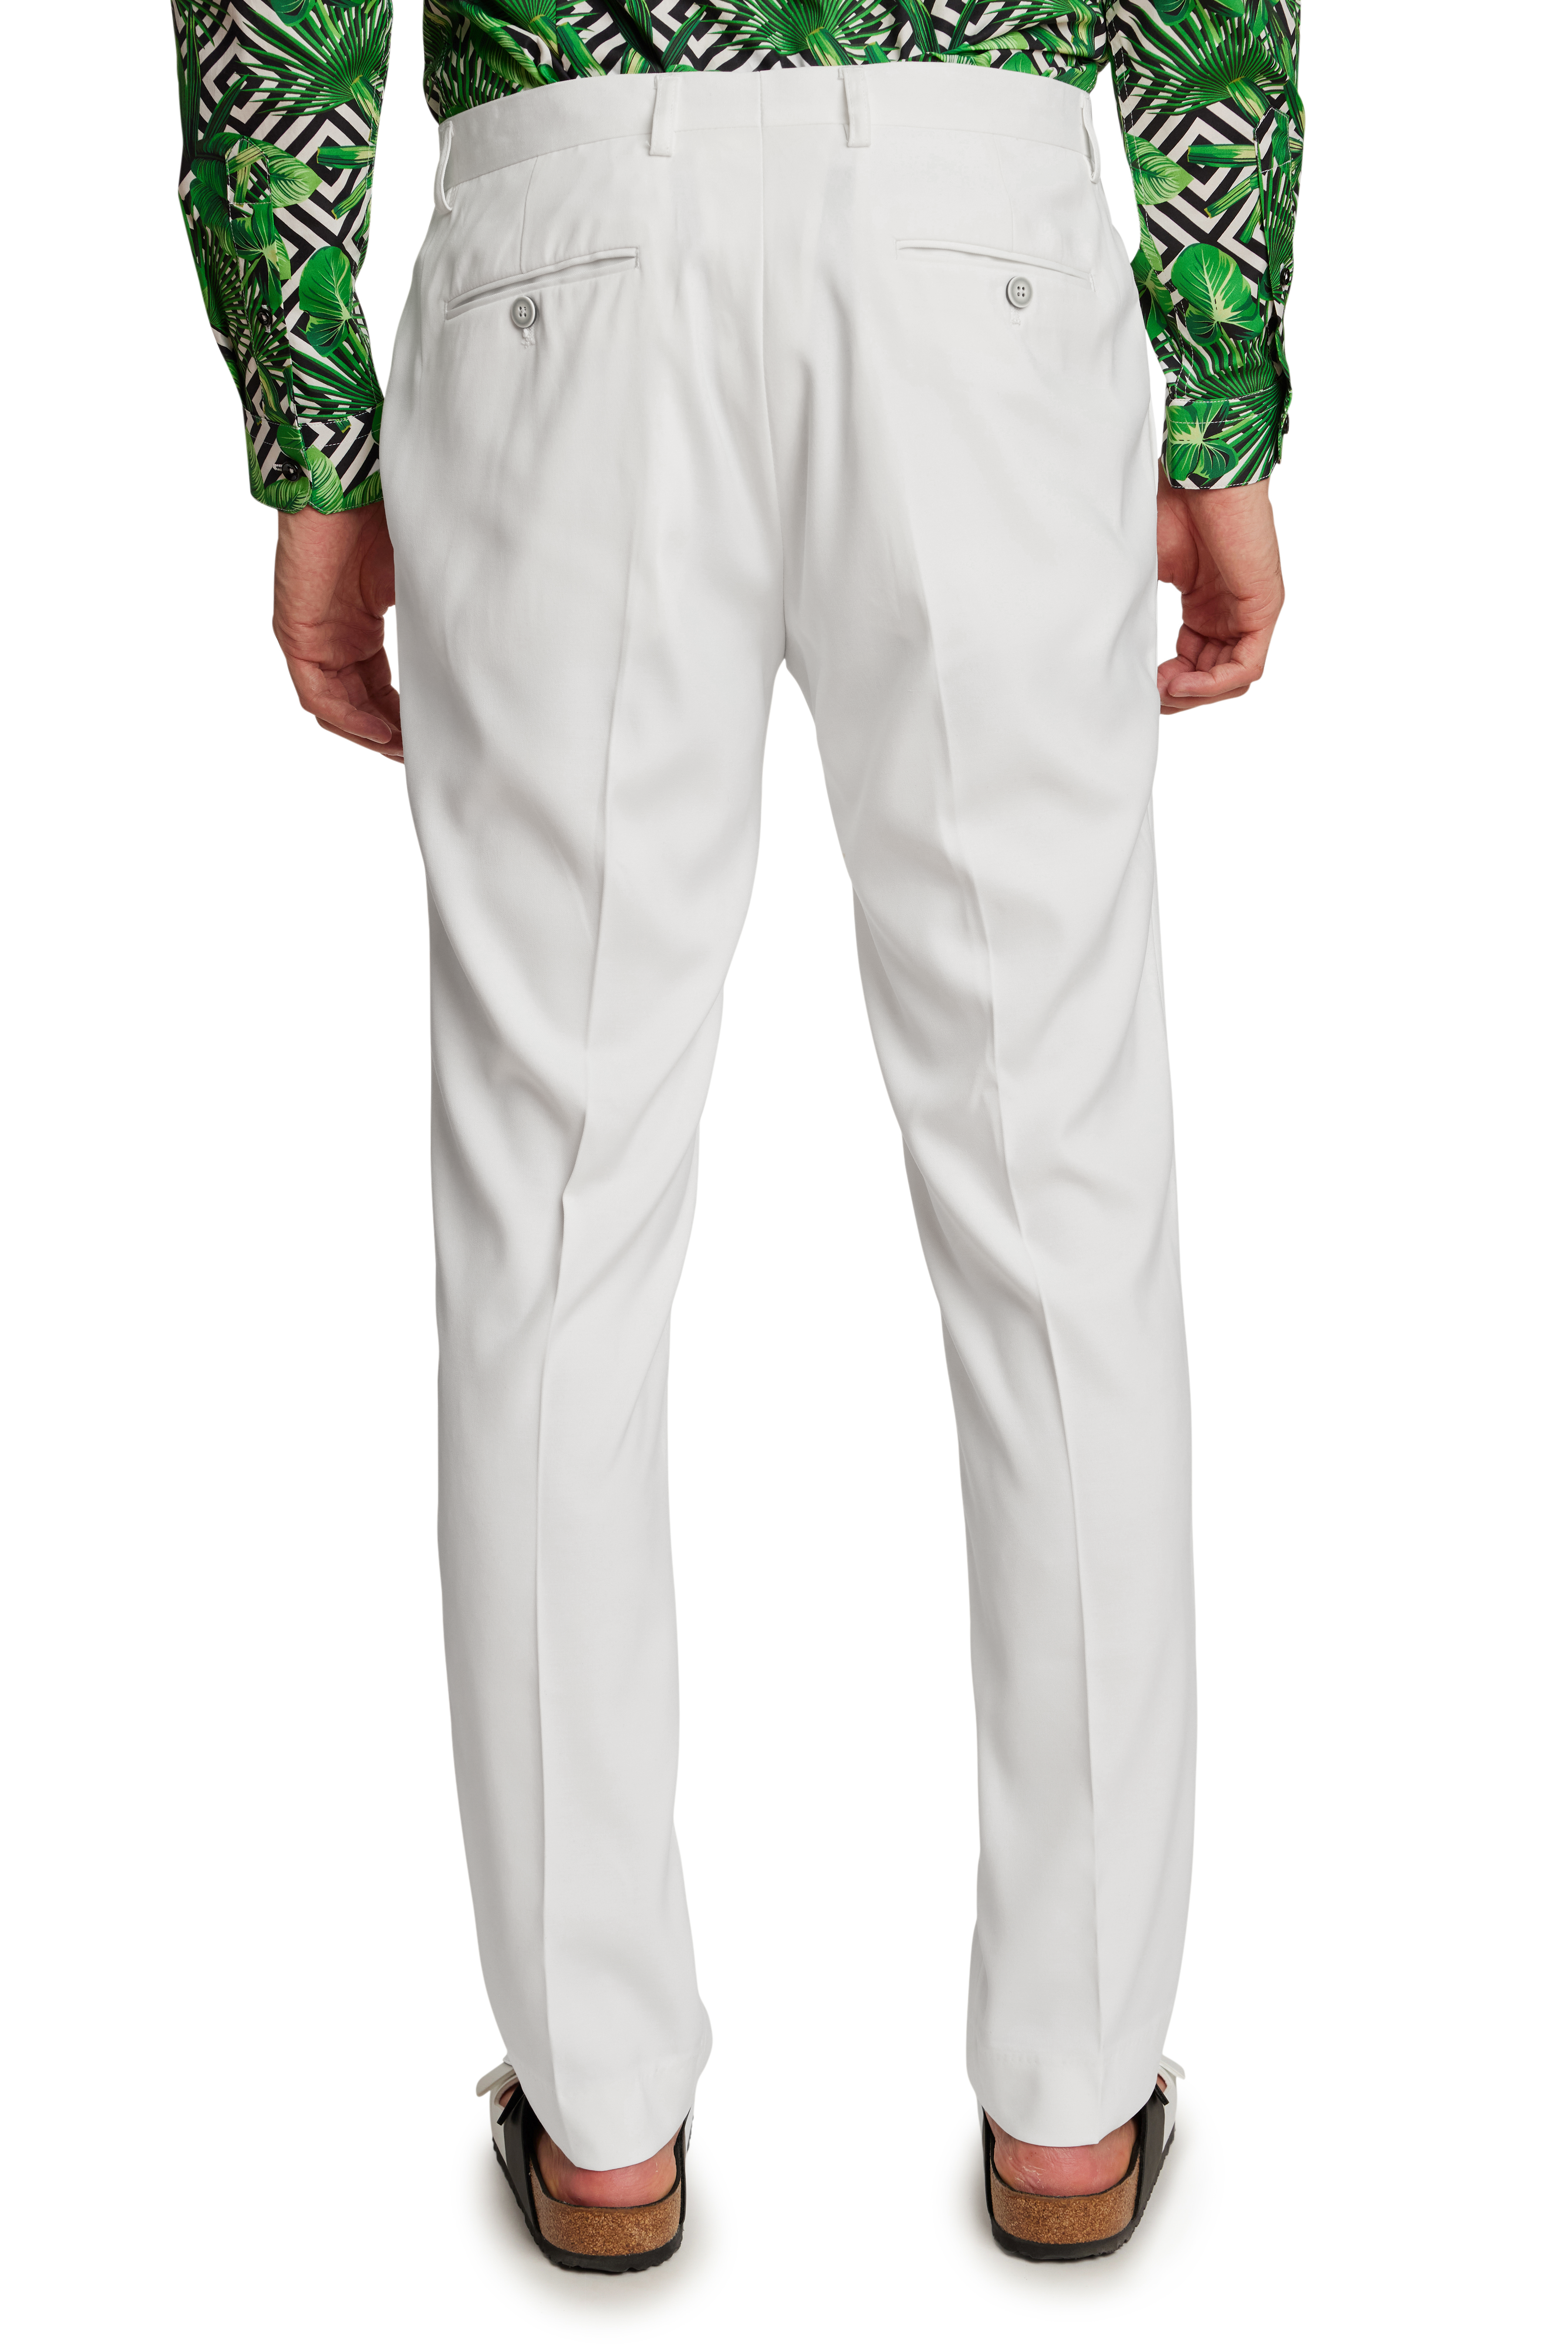 Downing Pants - slim - Lilly White